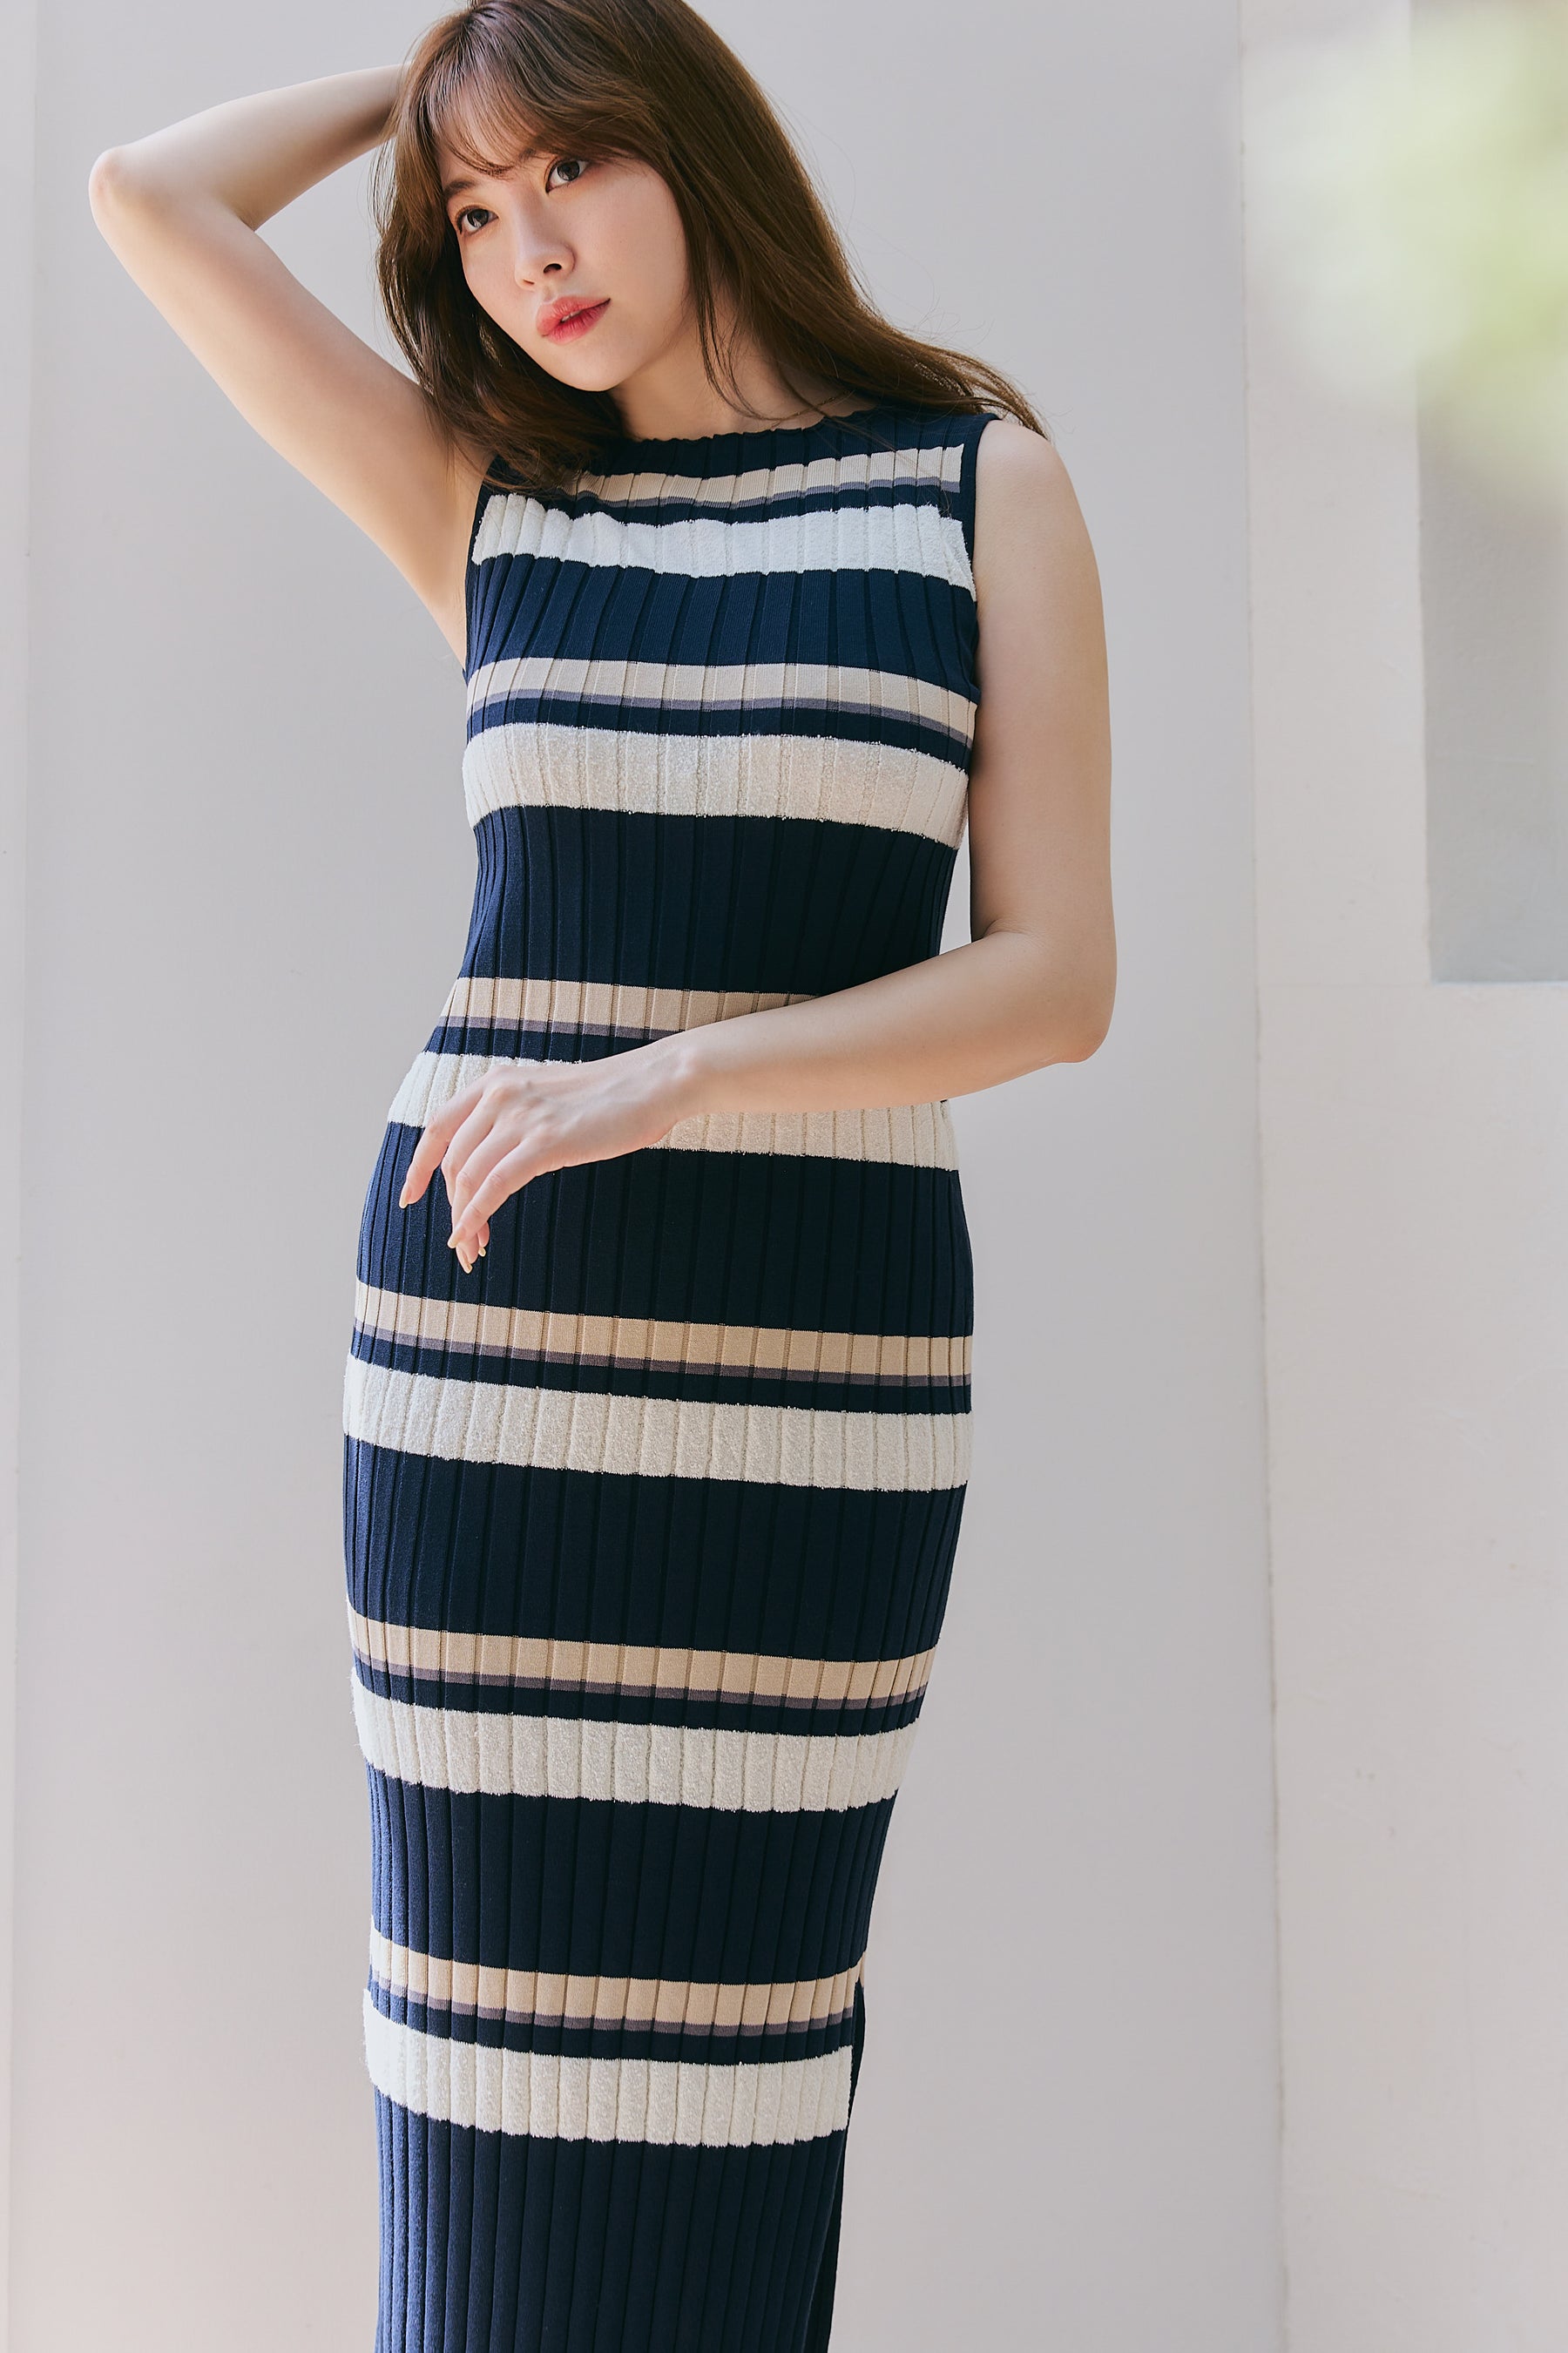 Shipped in mid-May] [New color] Cotton Striped Ribbed Knit Dress